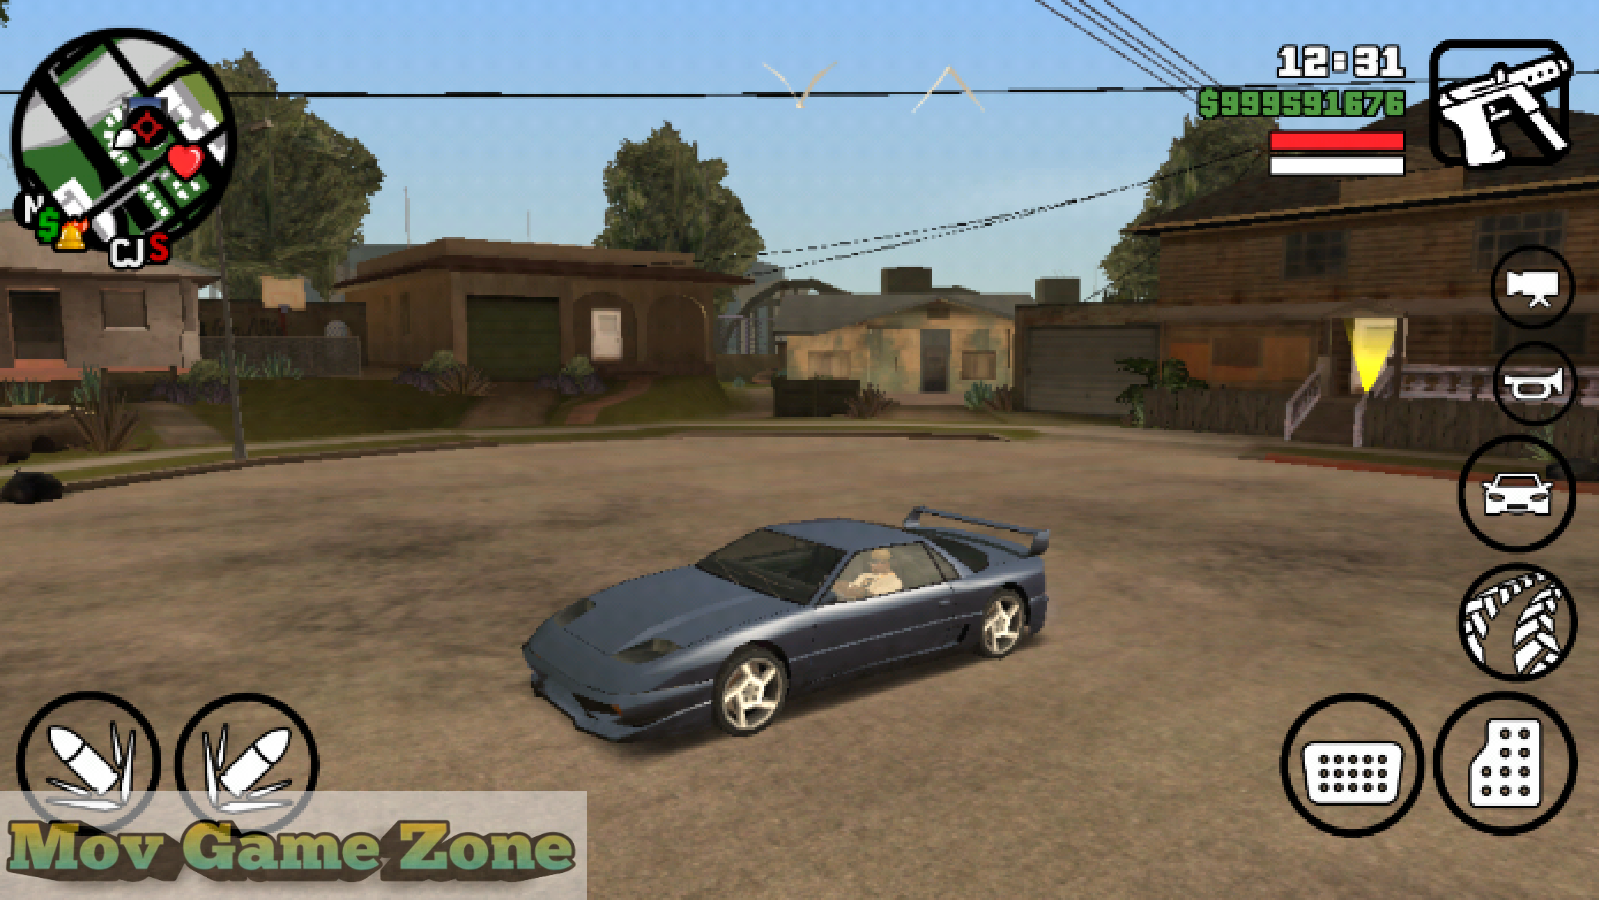 Gta San Andreas Cheats For Ppsspp - szever